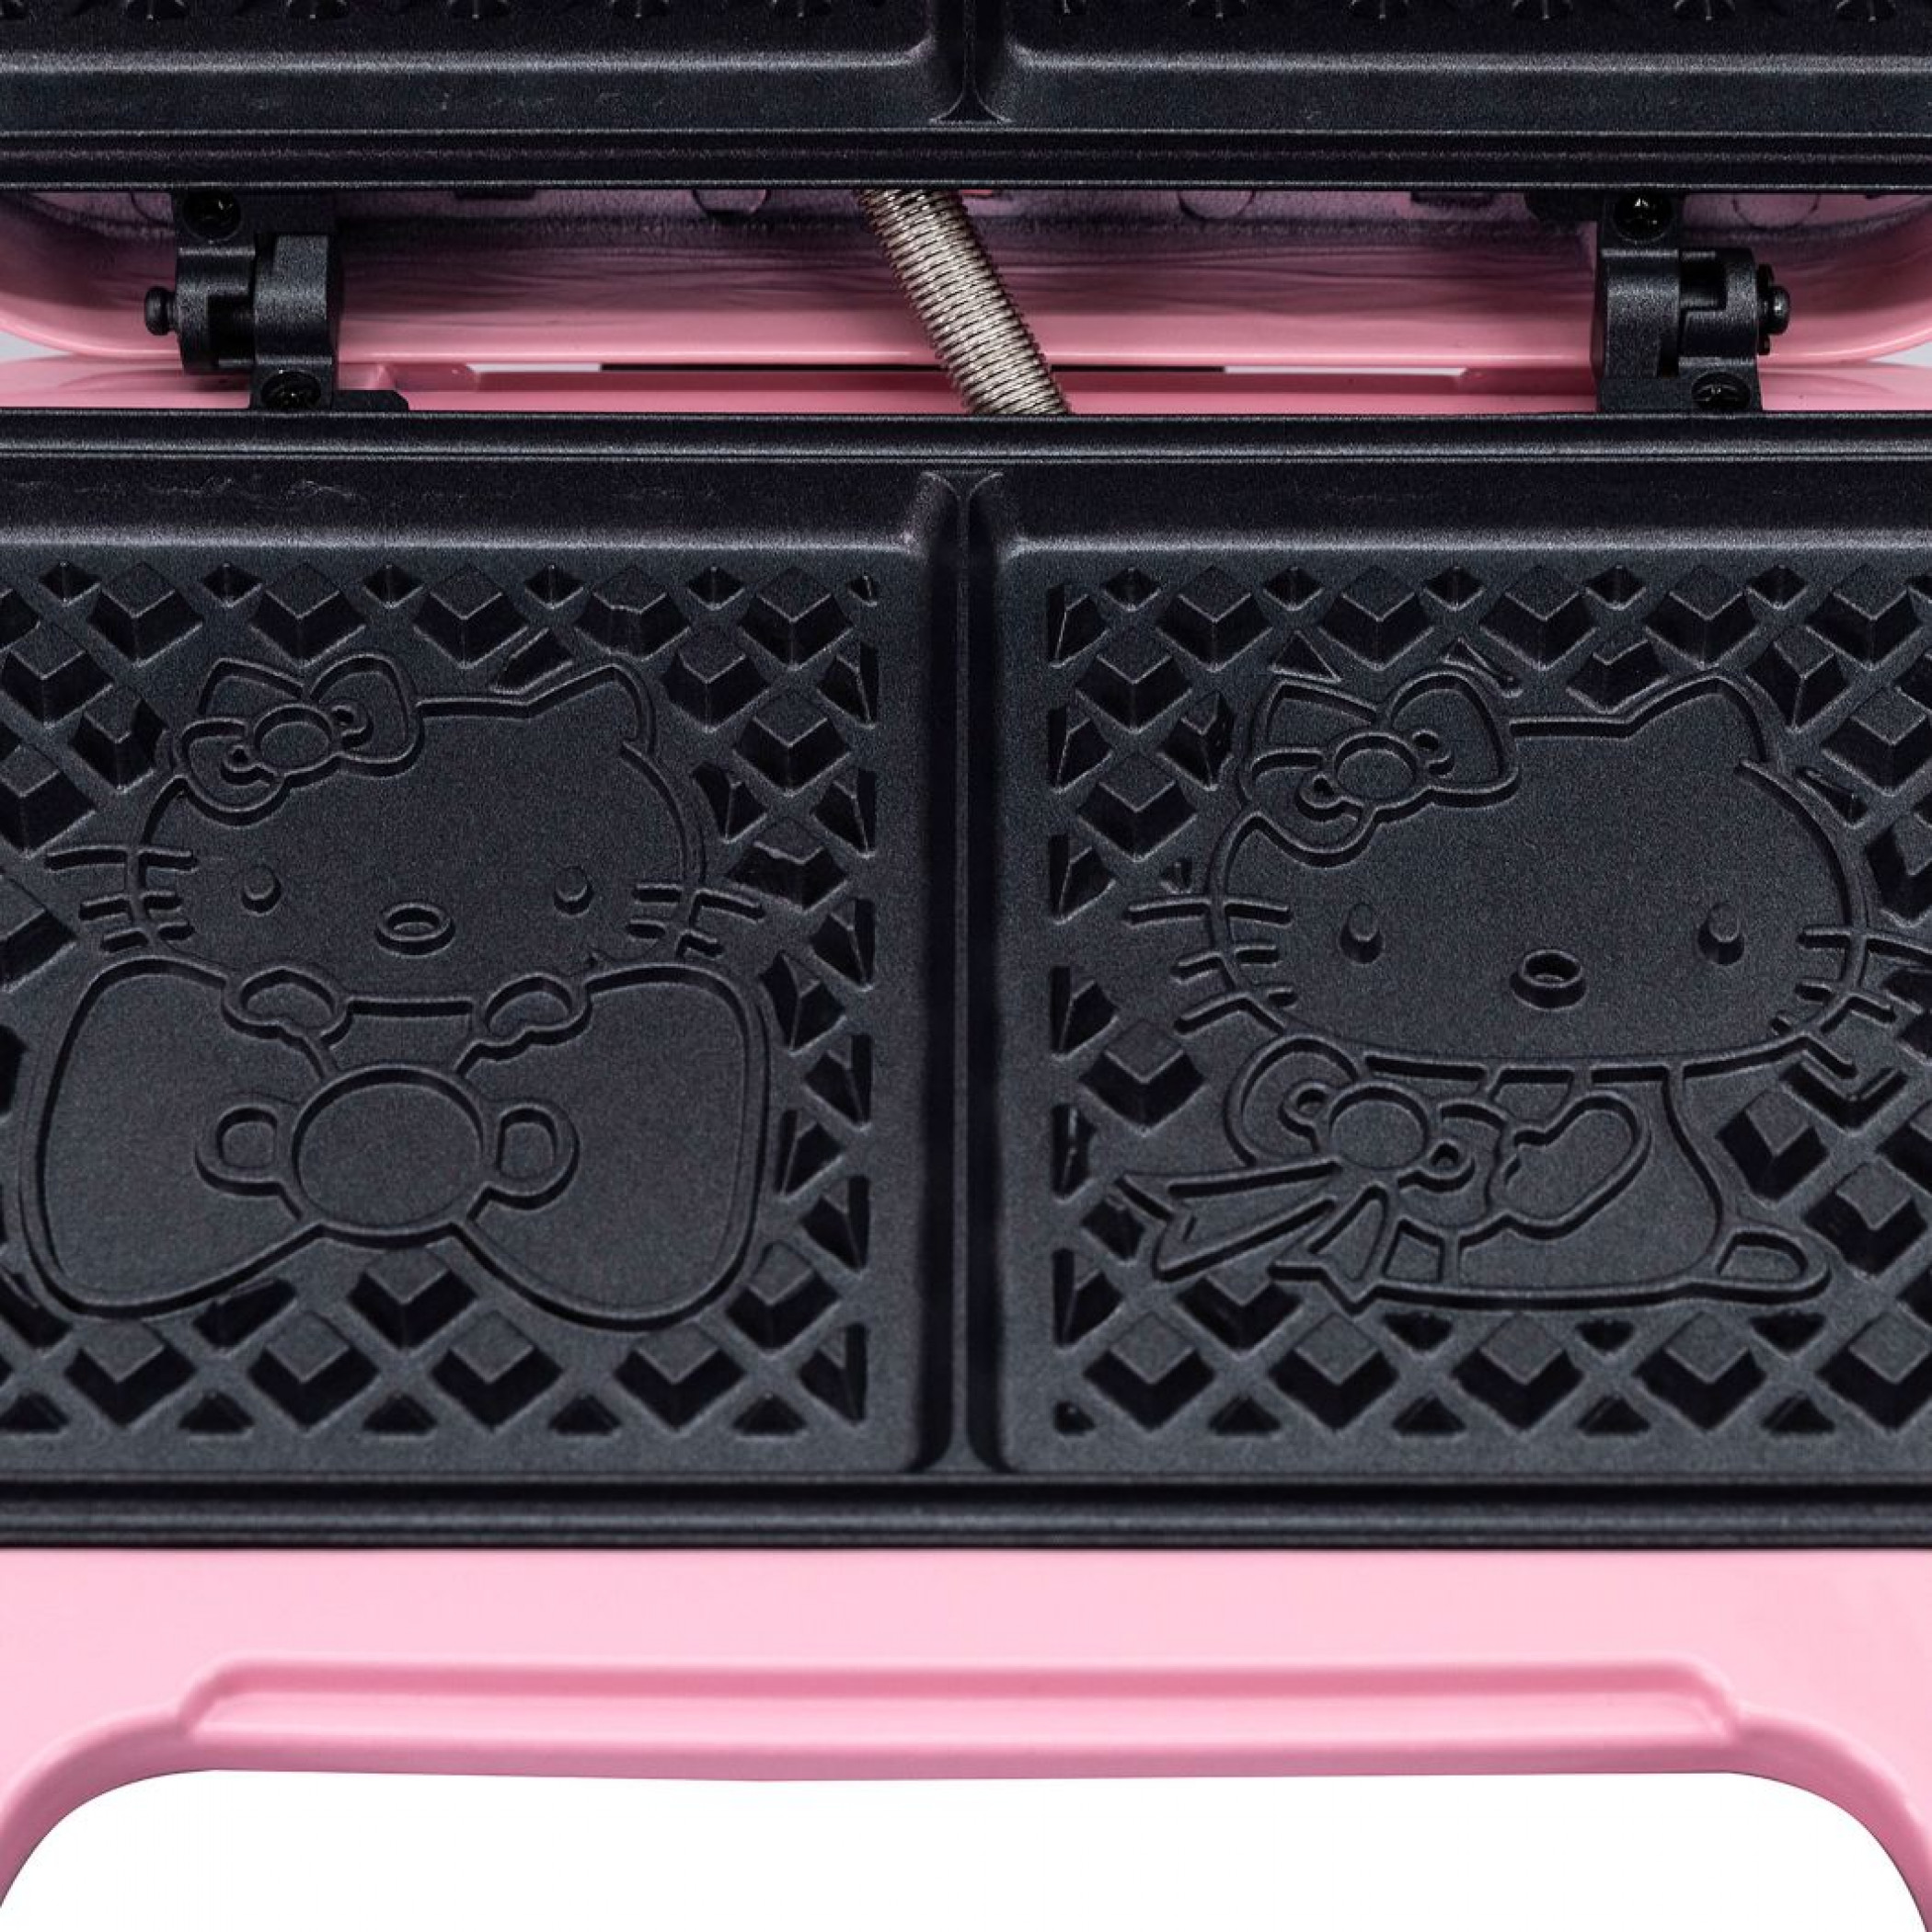 Hello Kitty Double-Square Waffle Maker